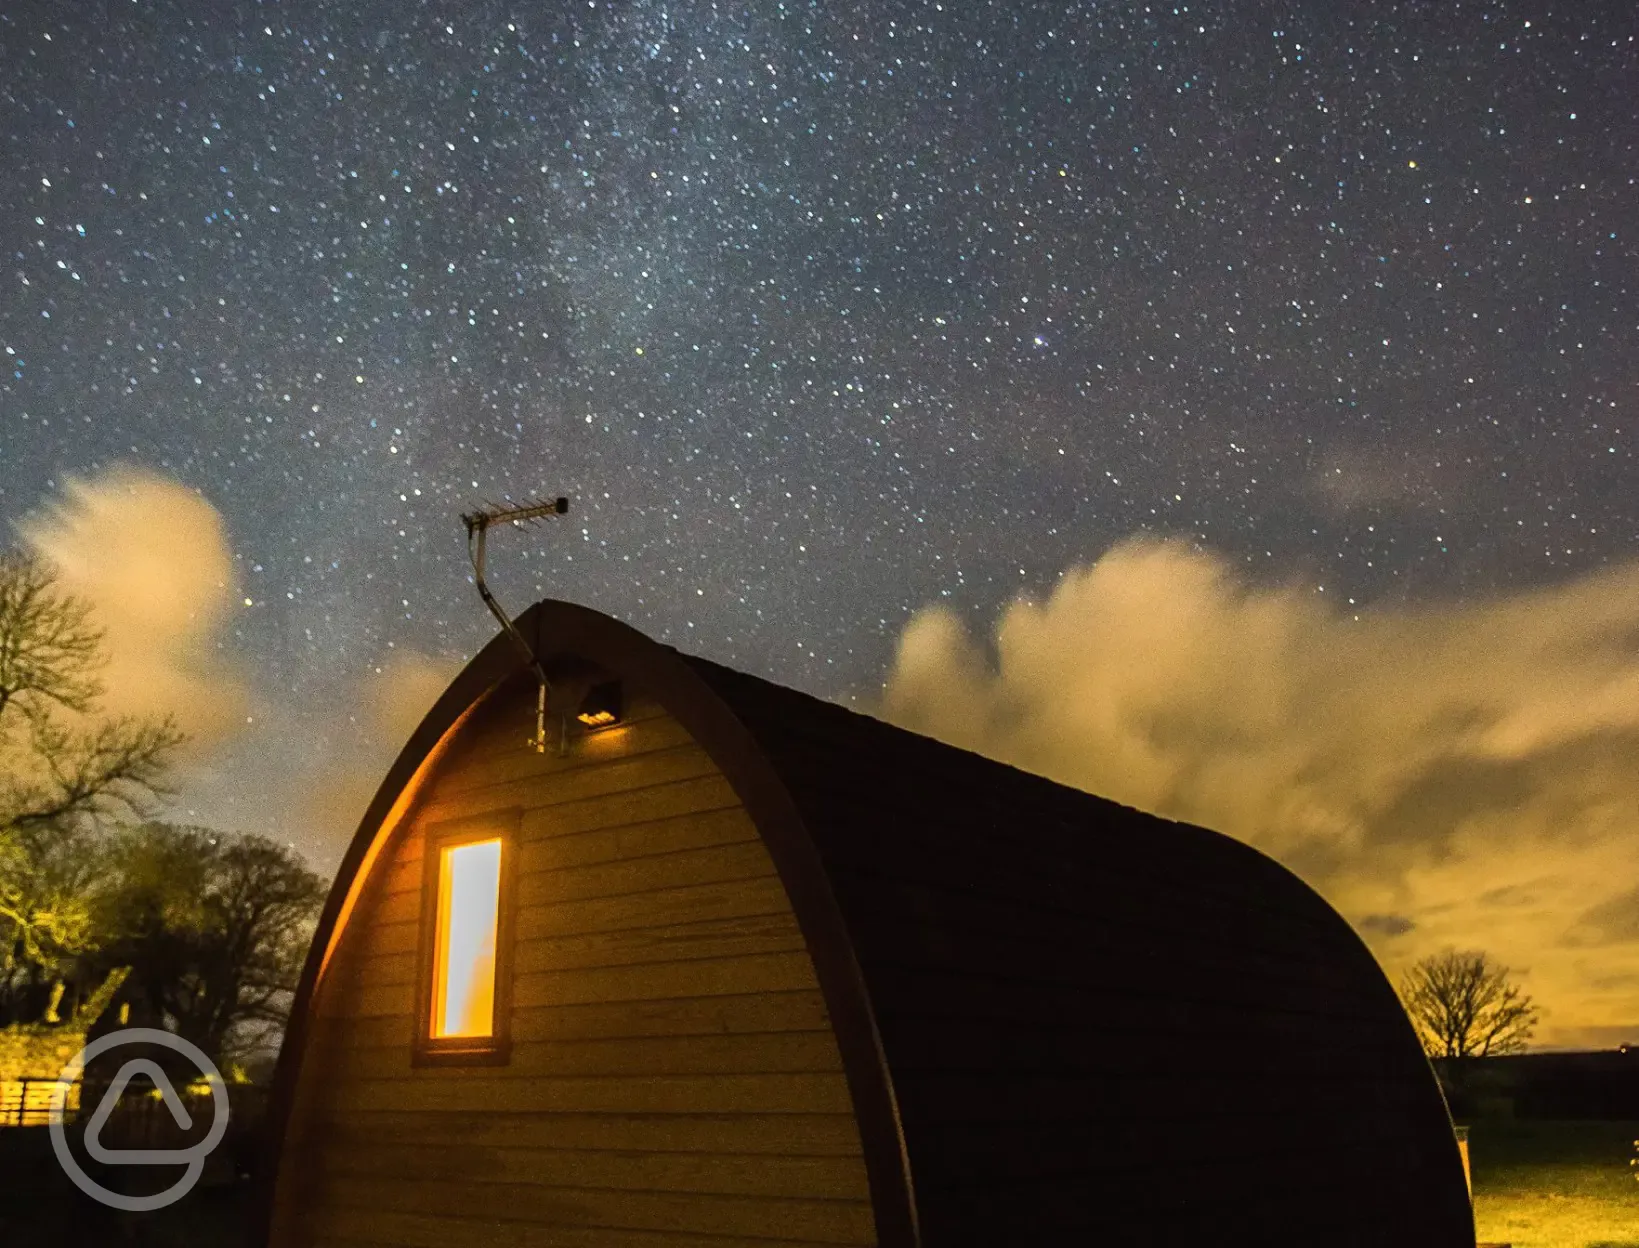 Award winning glamping pods with star-lit nights included